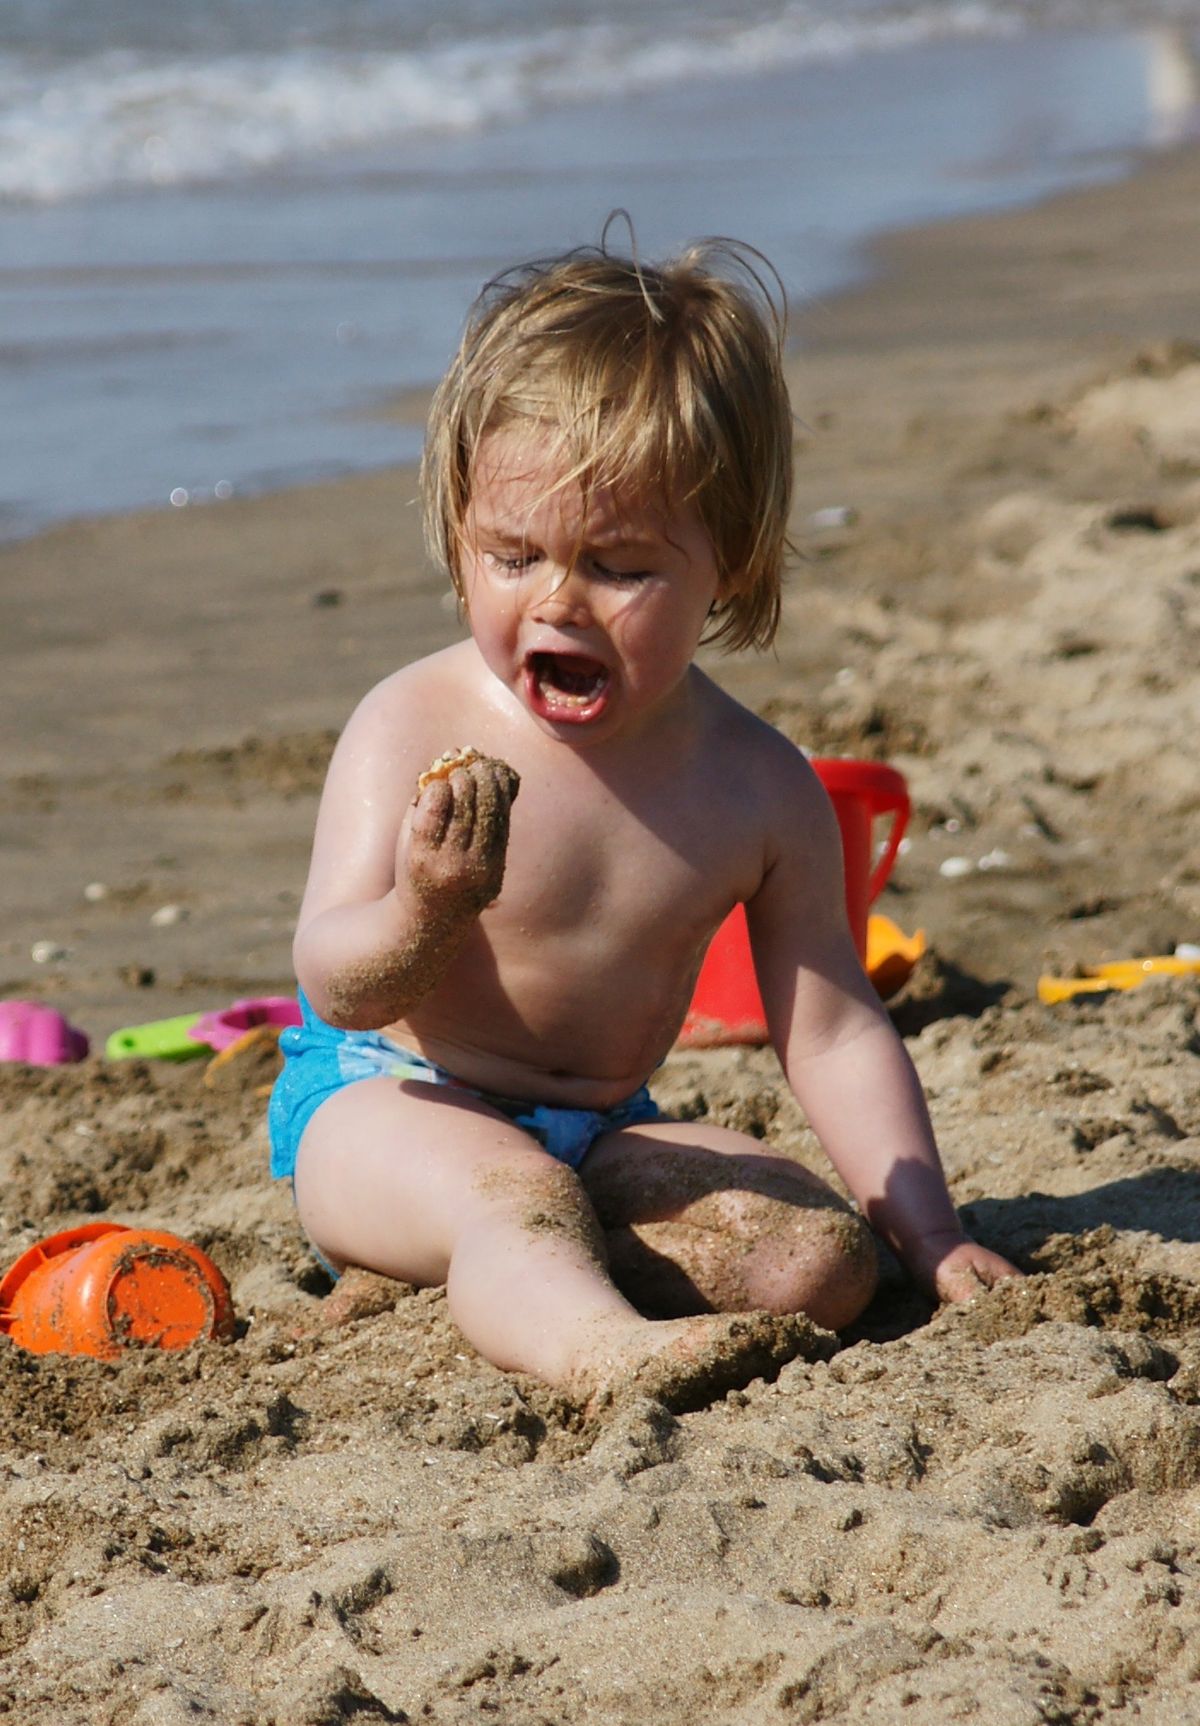 Matthieu - My daughter in a wild, sudden desperate feeling of rage, while her cookie felt in the sand ! How cruel, but so funny...